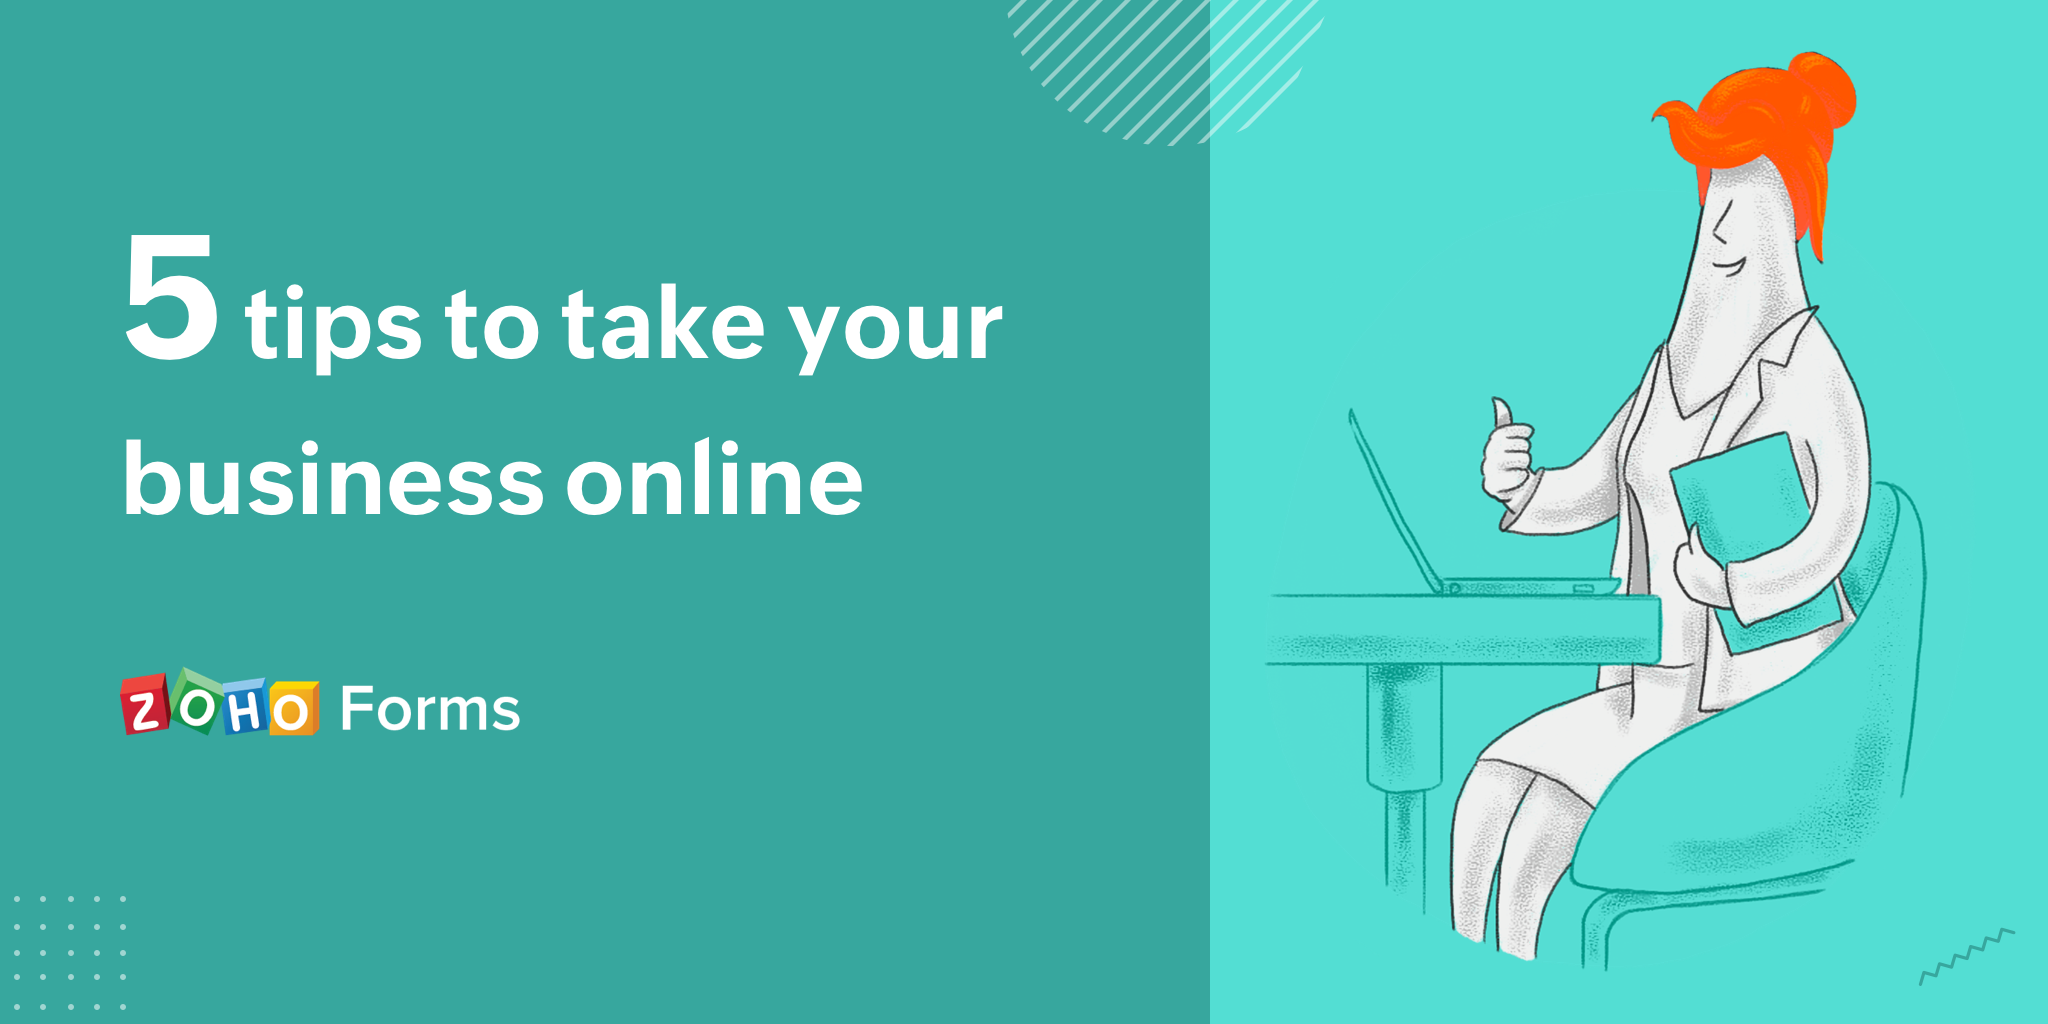 tips-to-take-business-online